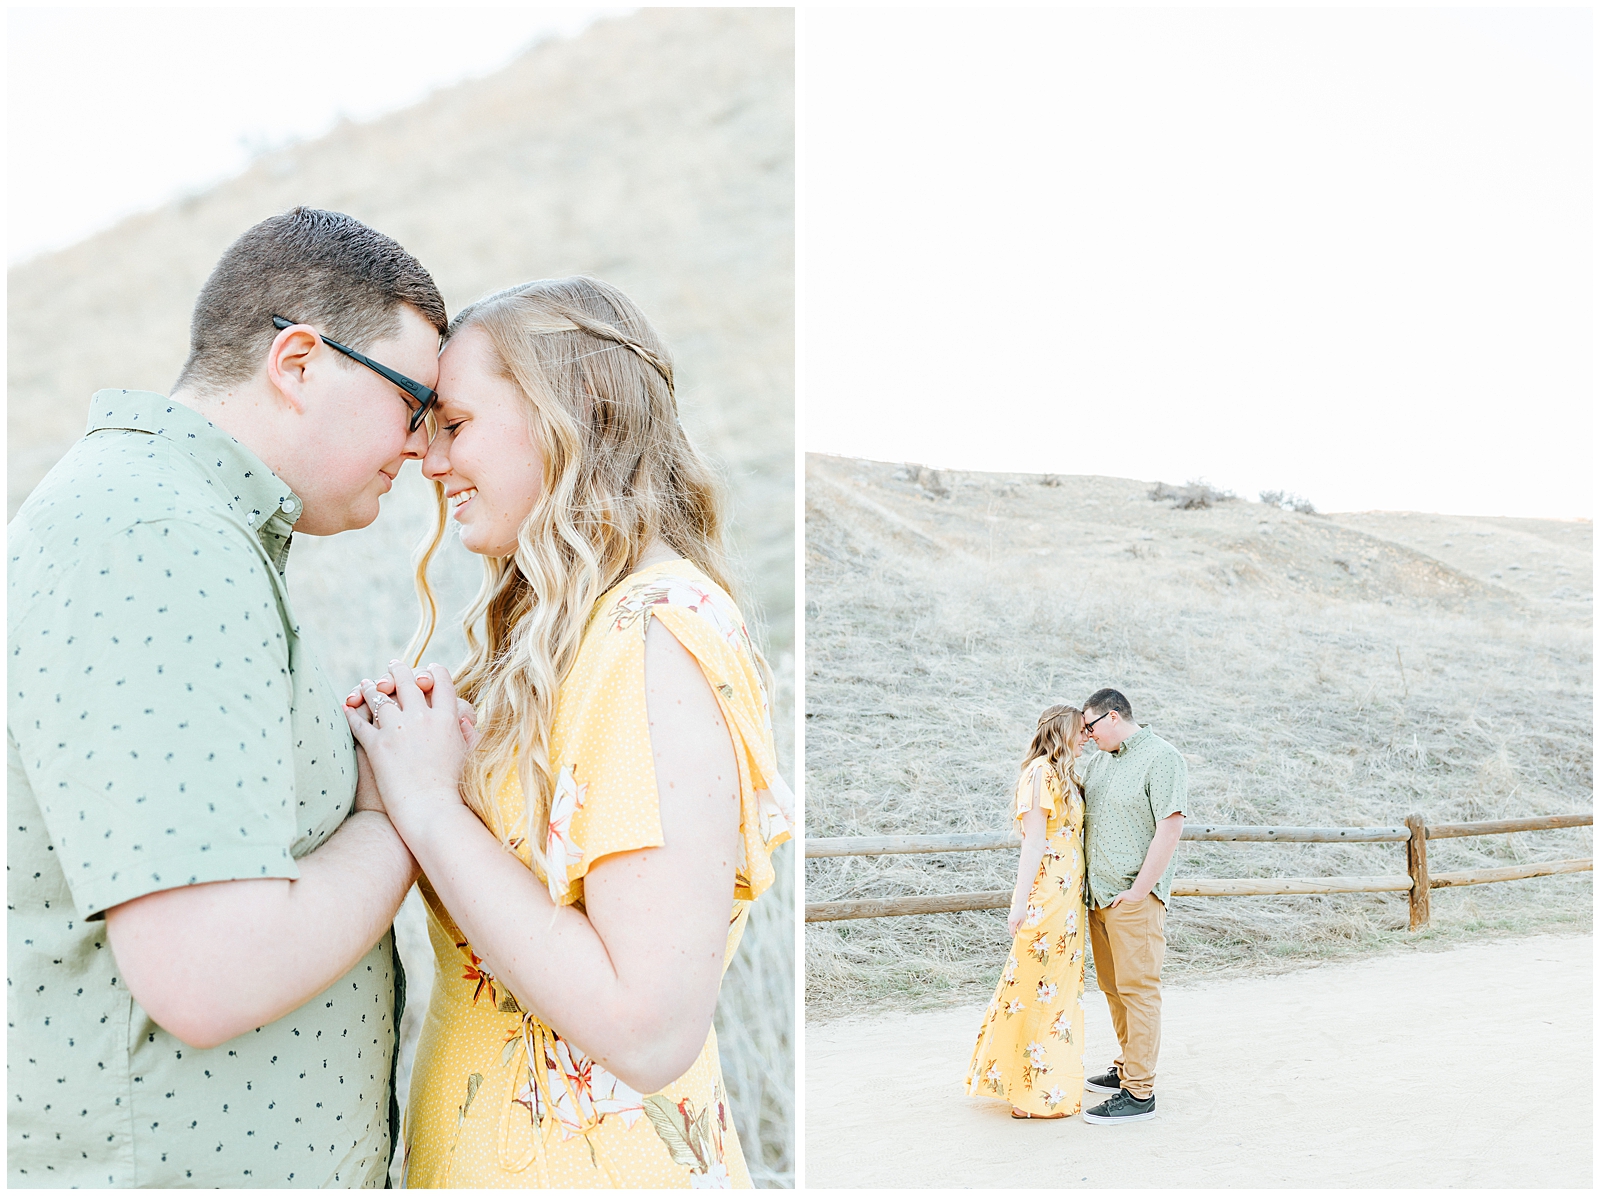 Spring Engagement Session at Camel's Back Park in Boise Idaho